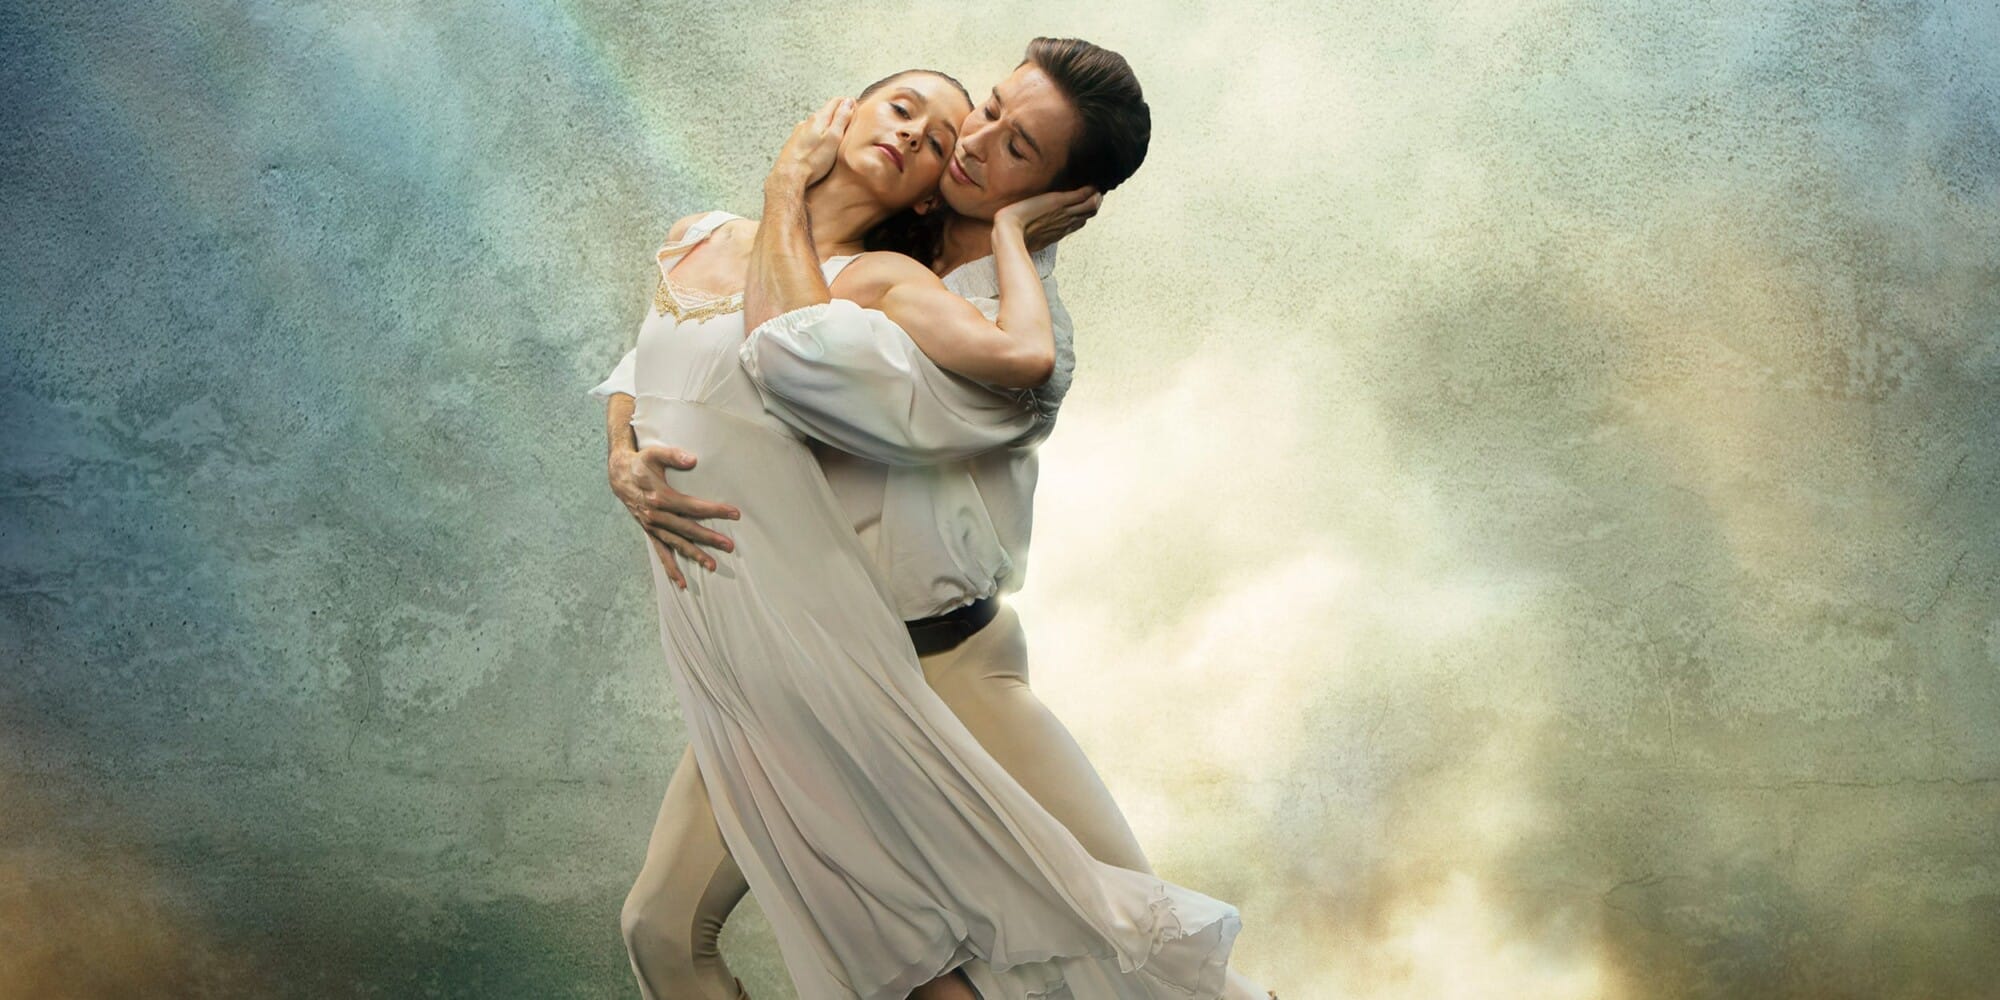 Northern Ballet’s Romeo And Juliet